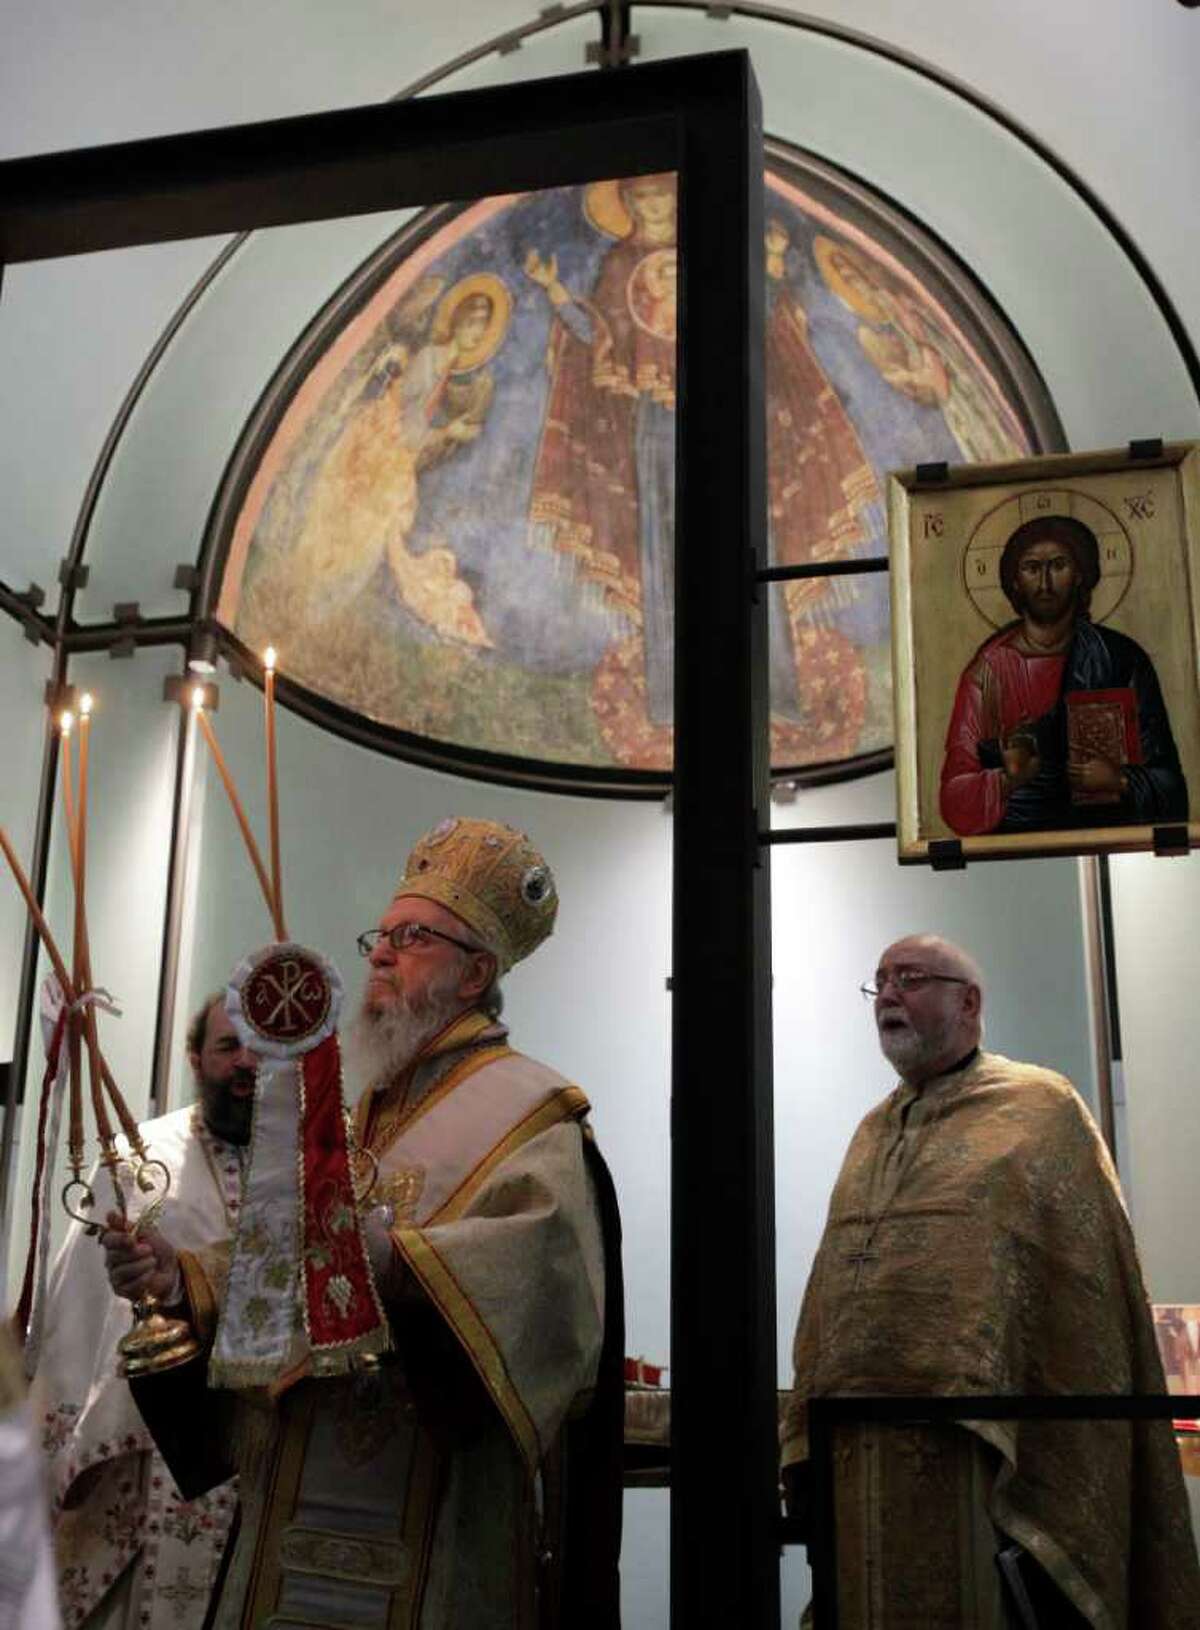 In the Menil Collection's Byzantine Fresco Chapel on Saturday, Archbishop Demetrios, of the Greek Orthodox Church in America, takes part in farewell ceremonies marking the return of frescoes to Cyprus. The 700-year-old Byzantine frescoes are set to return to the Mediterranean island later this month.